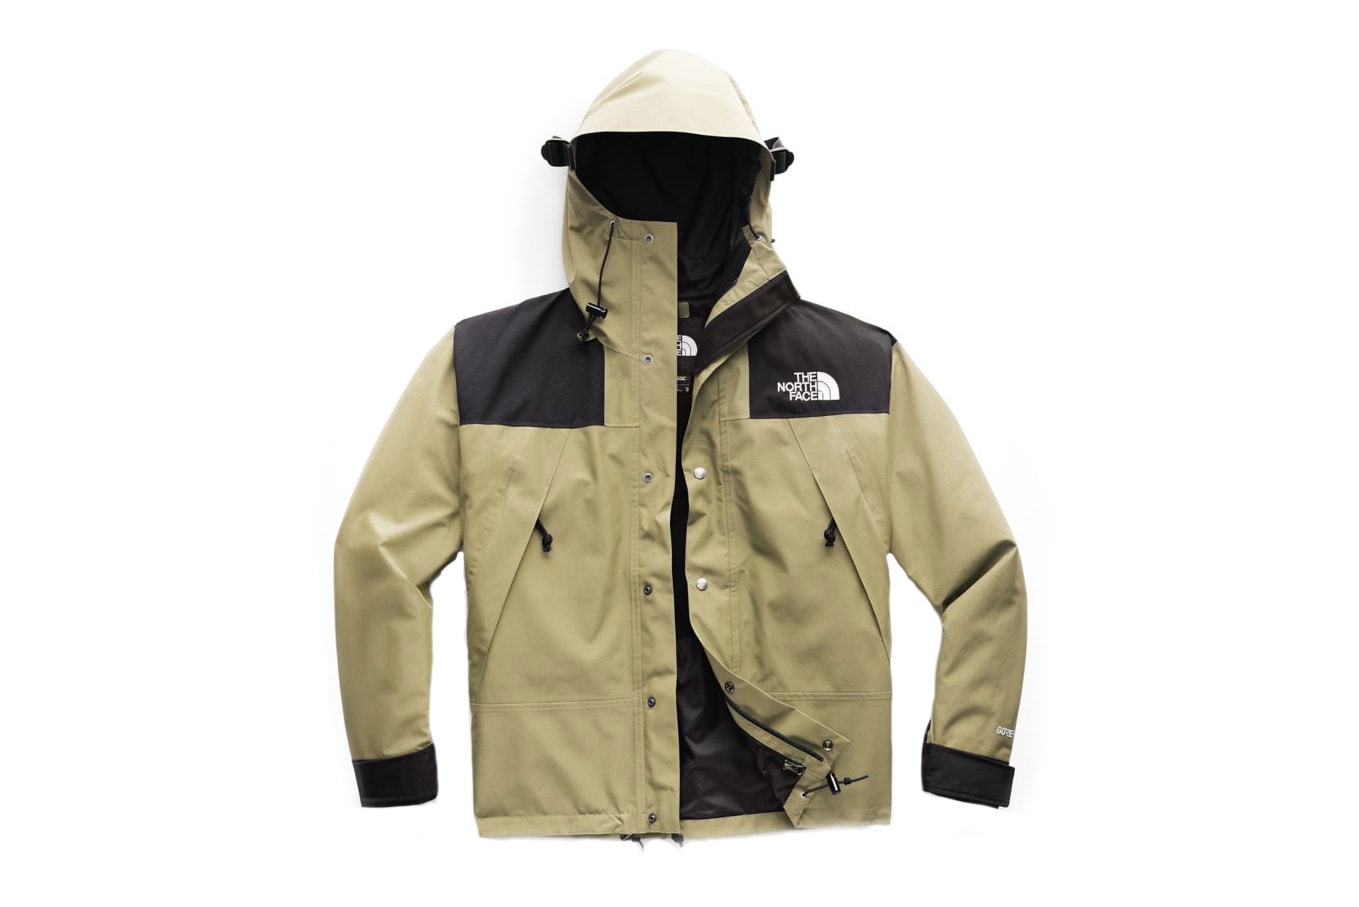 New The North Face 1990 Mountain Jacket GTX® Colorways